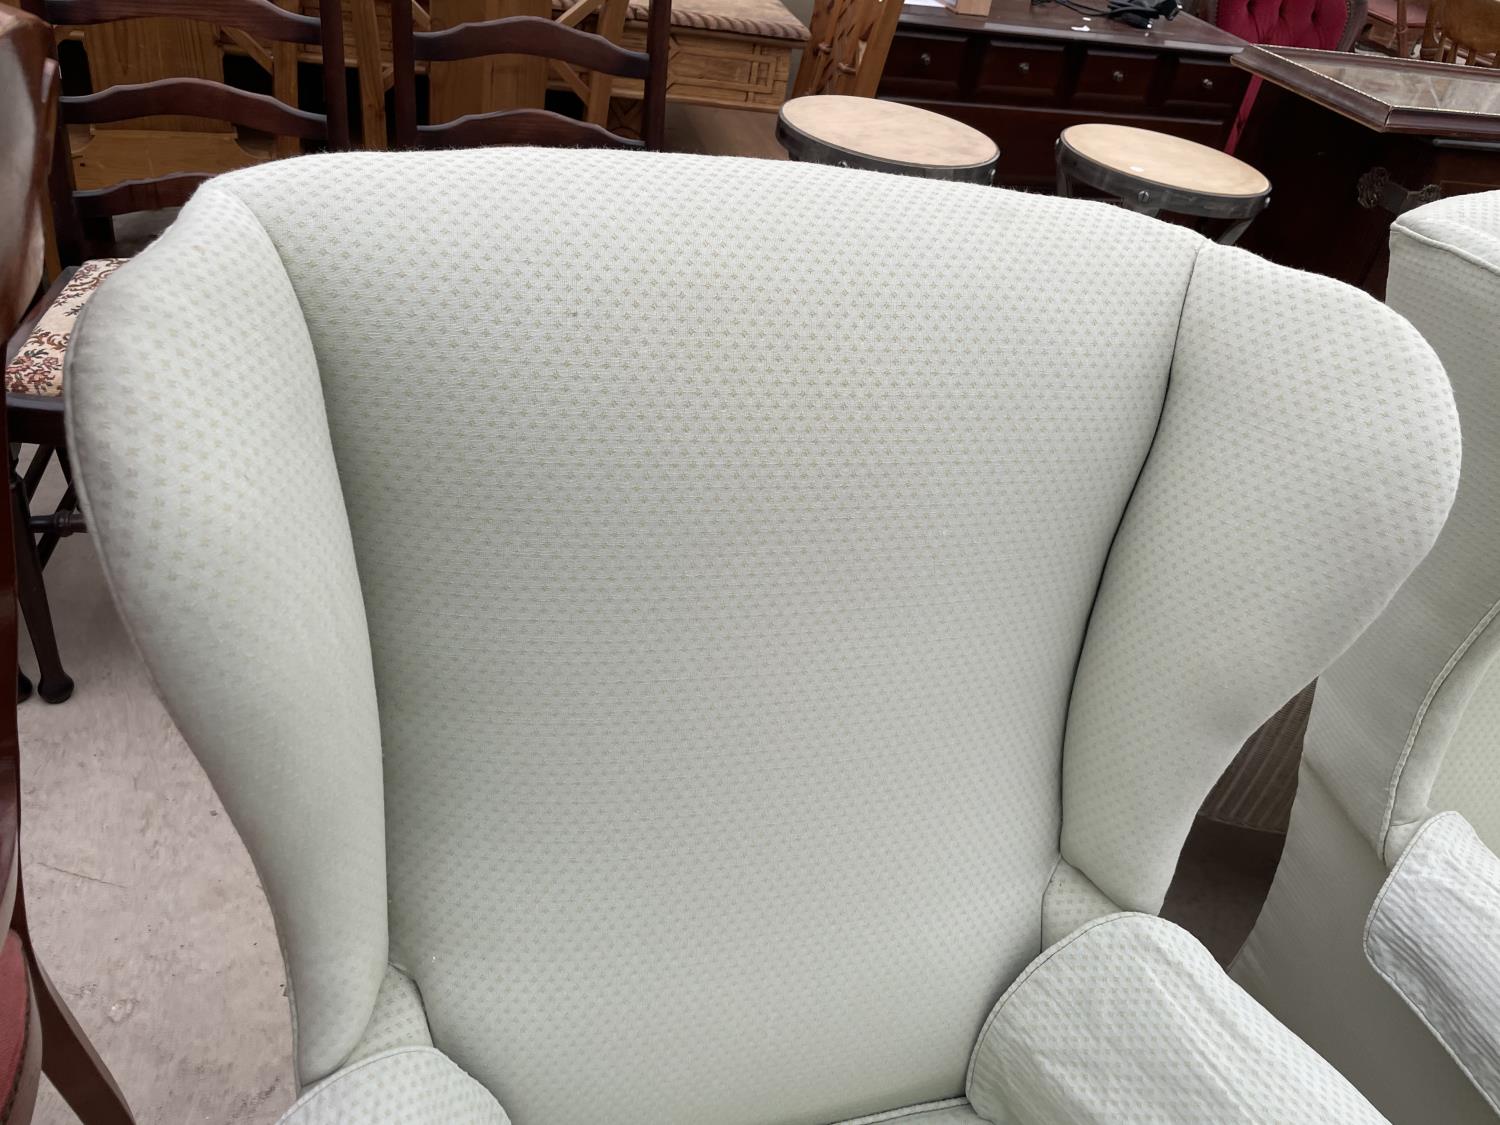 TWO PARKER KNOLL WING BACK ARMCHAIRS - MODEL PK720/45 - Image 2 of 7